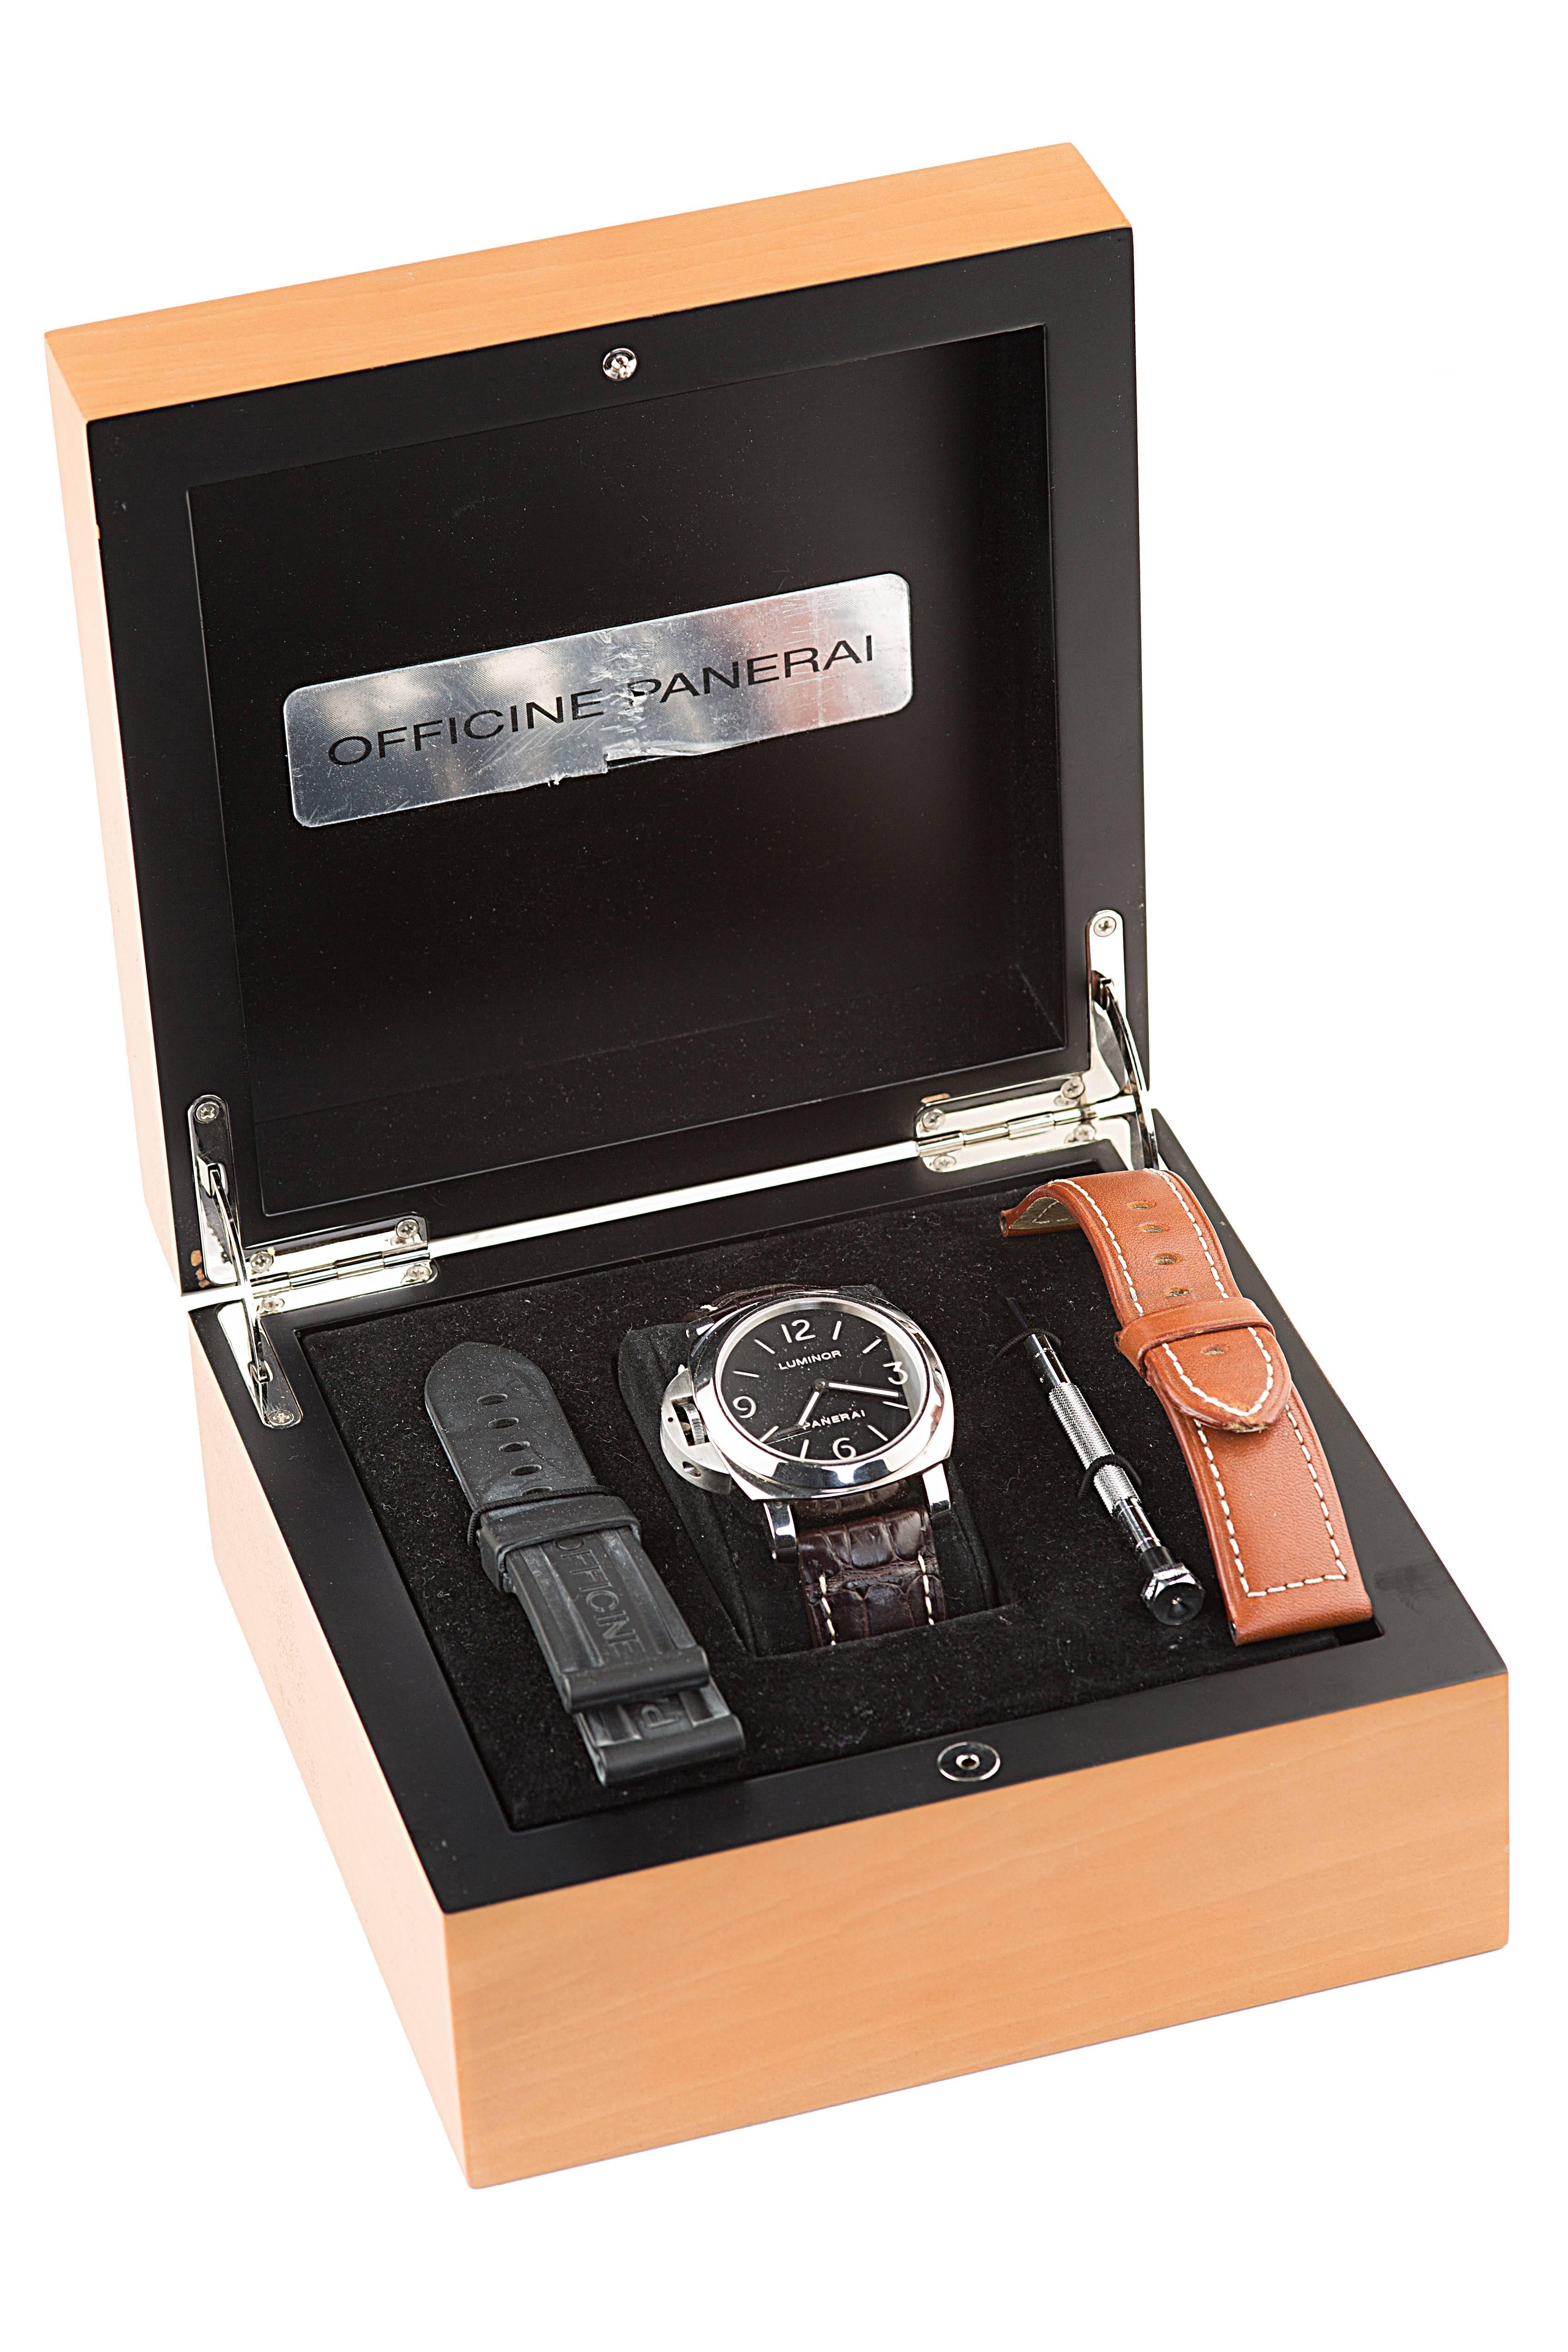 Panerai Luminor PAM 219 Stainless Steel Lefty Men's Watch. The watch has black face, 44mm case, observational back, and sapphire crystal. Comes with box, case, and two extra bands. 